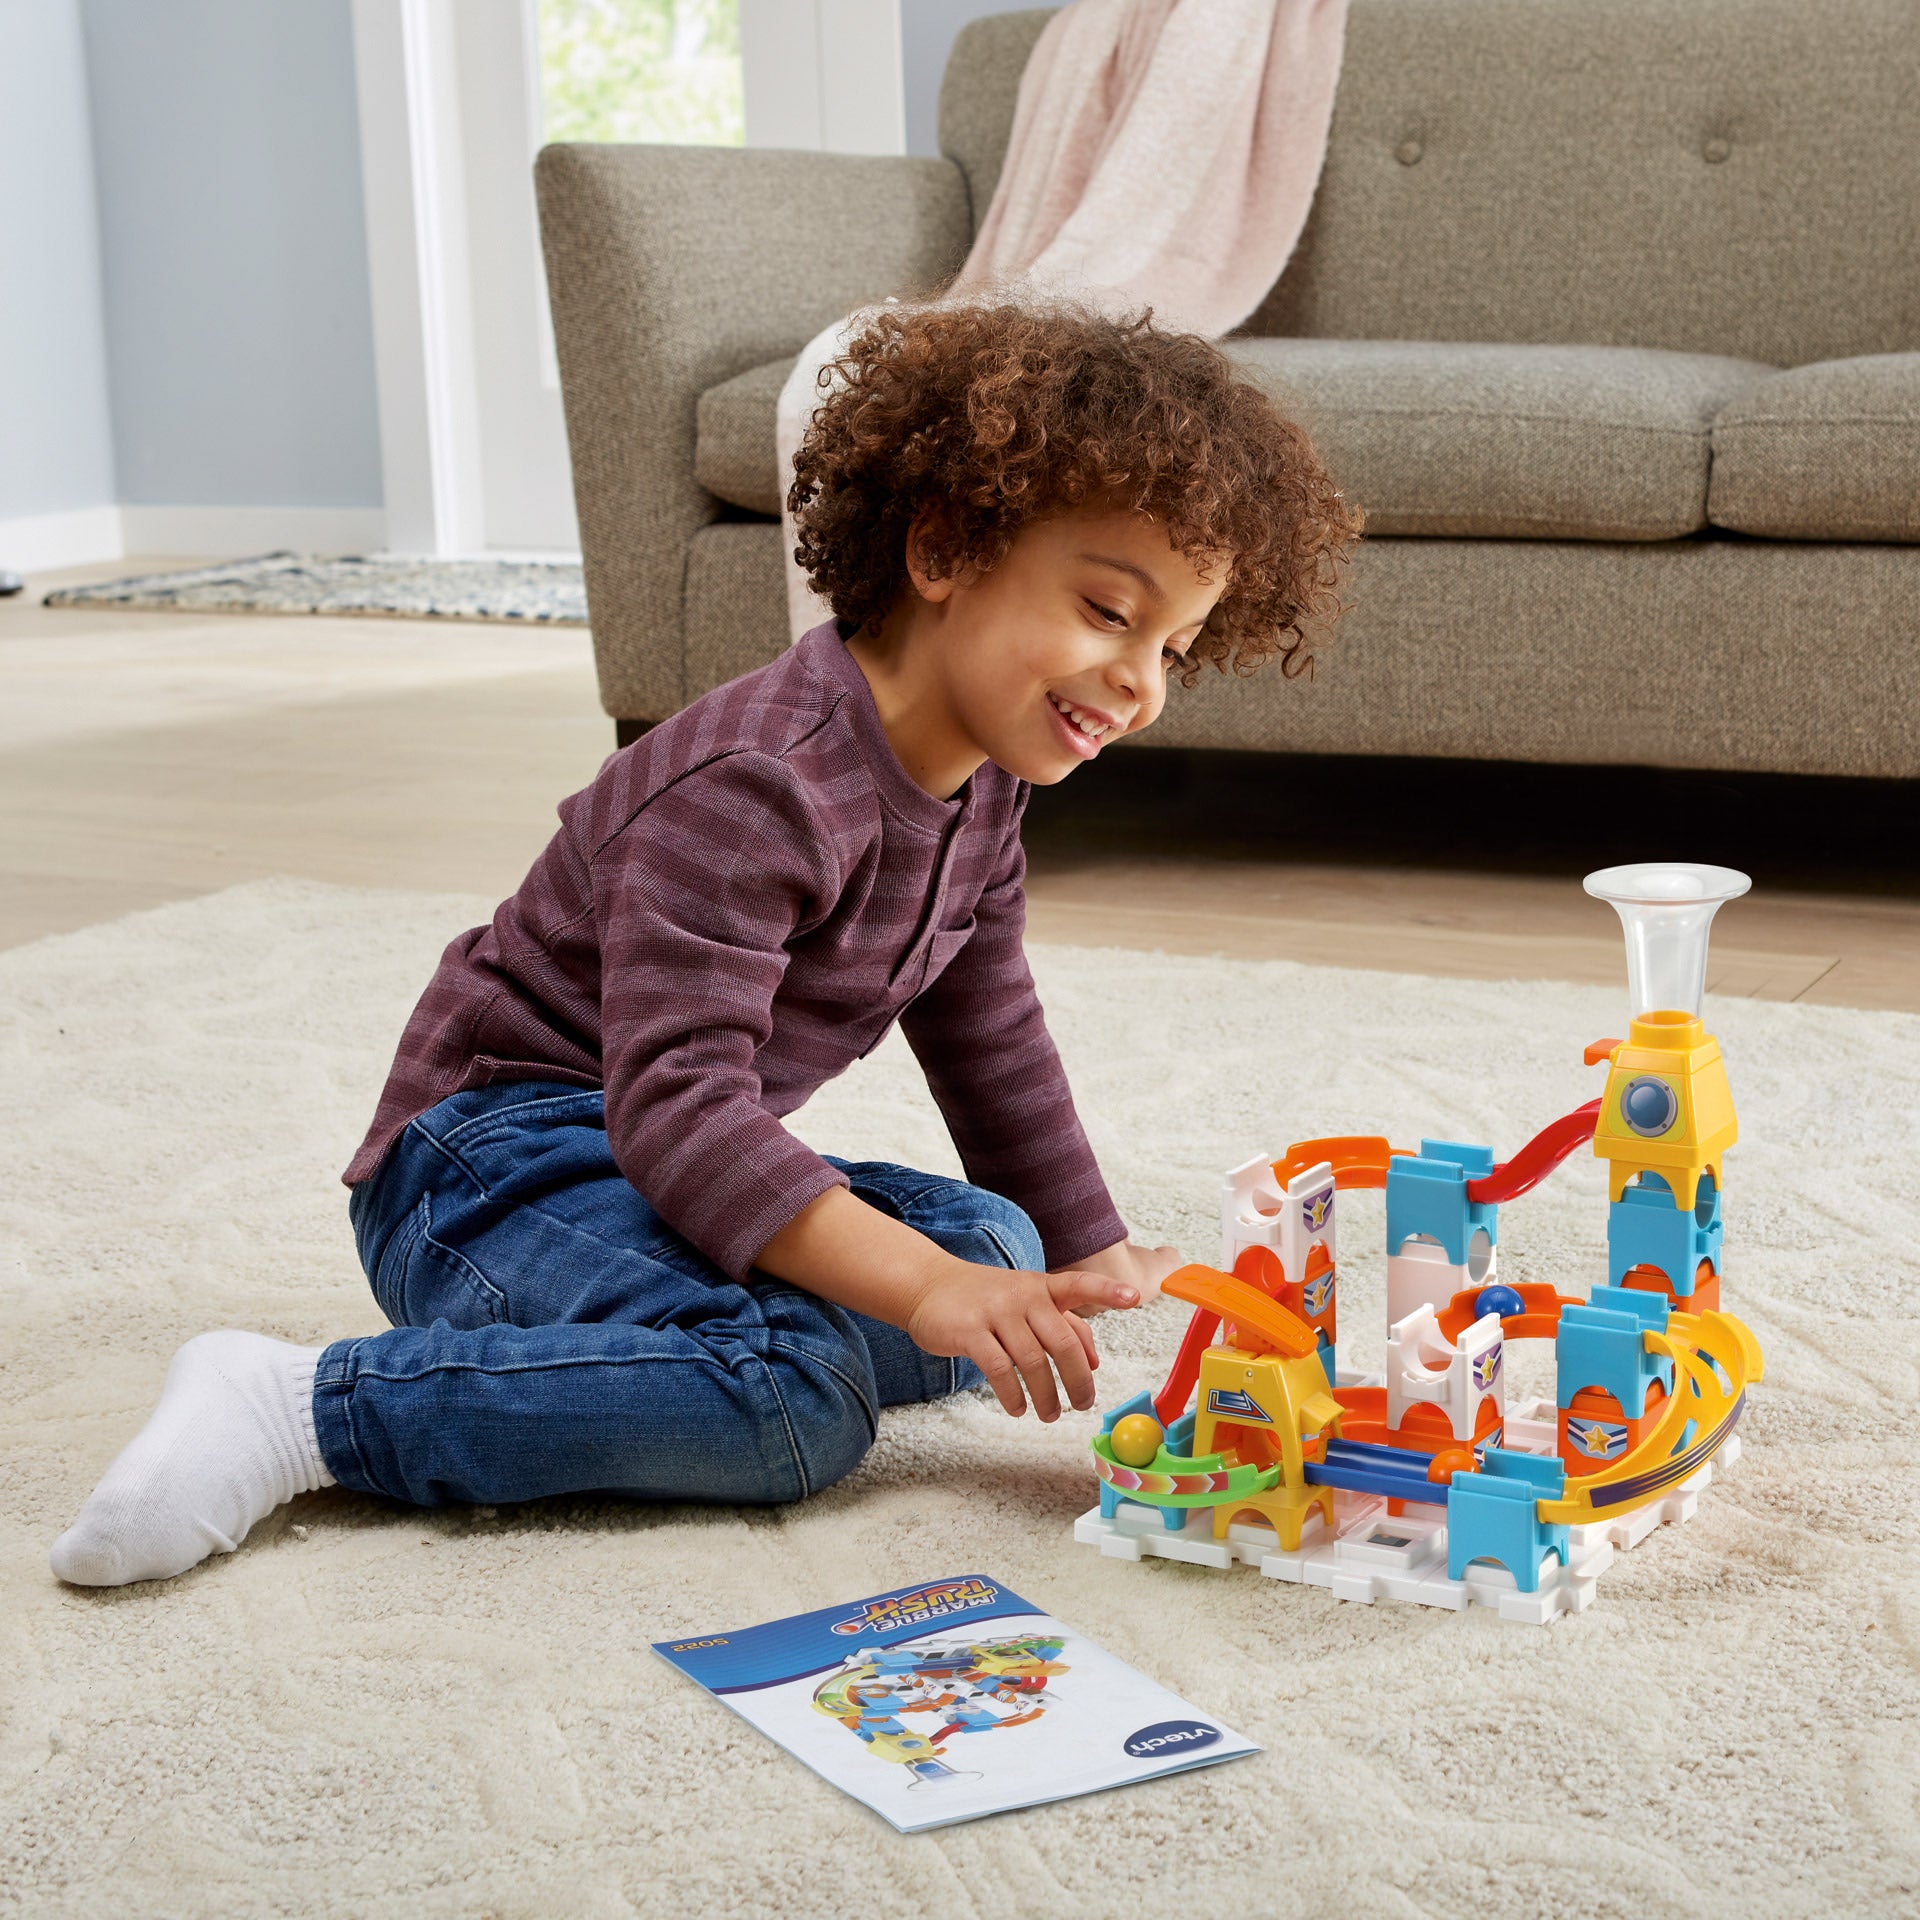 80-502249 VTECH Marble Rush - Discovery Set